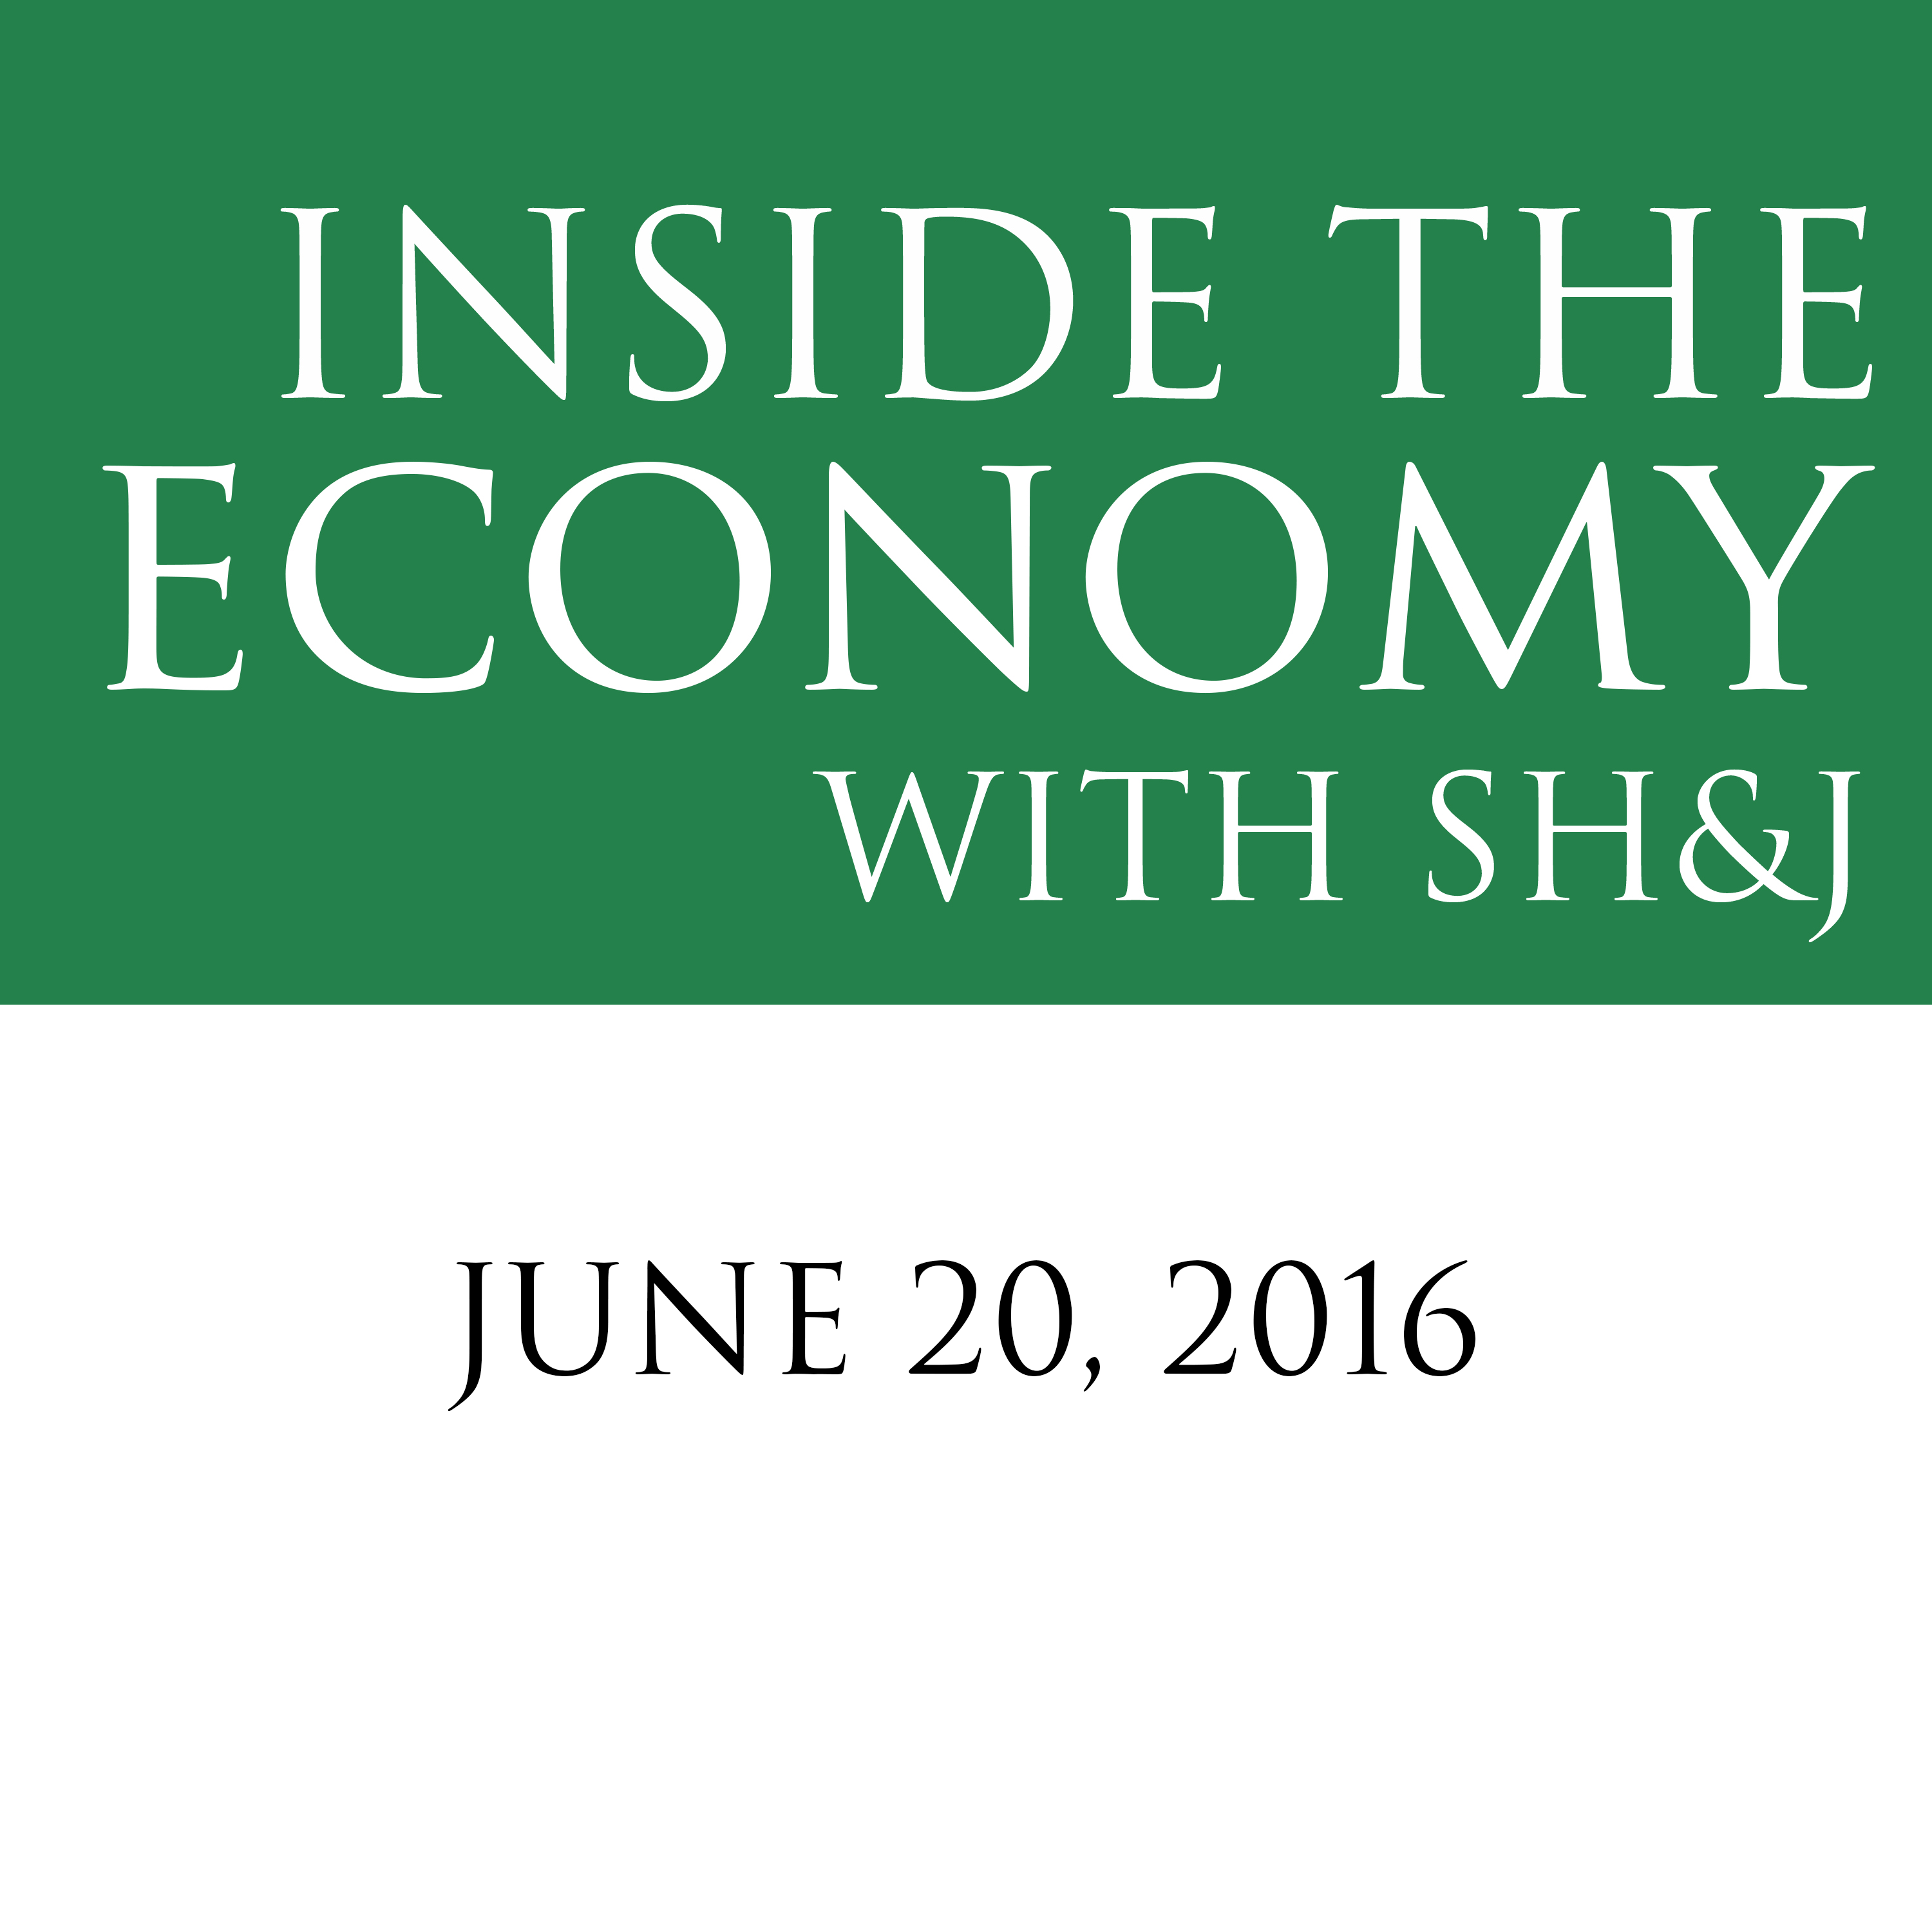 June 20, 2016  --  Inside the Economy With SH&J